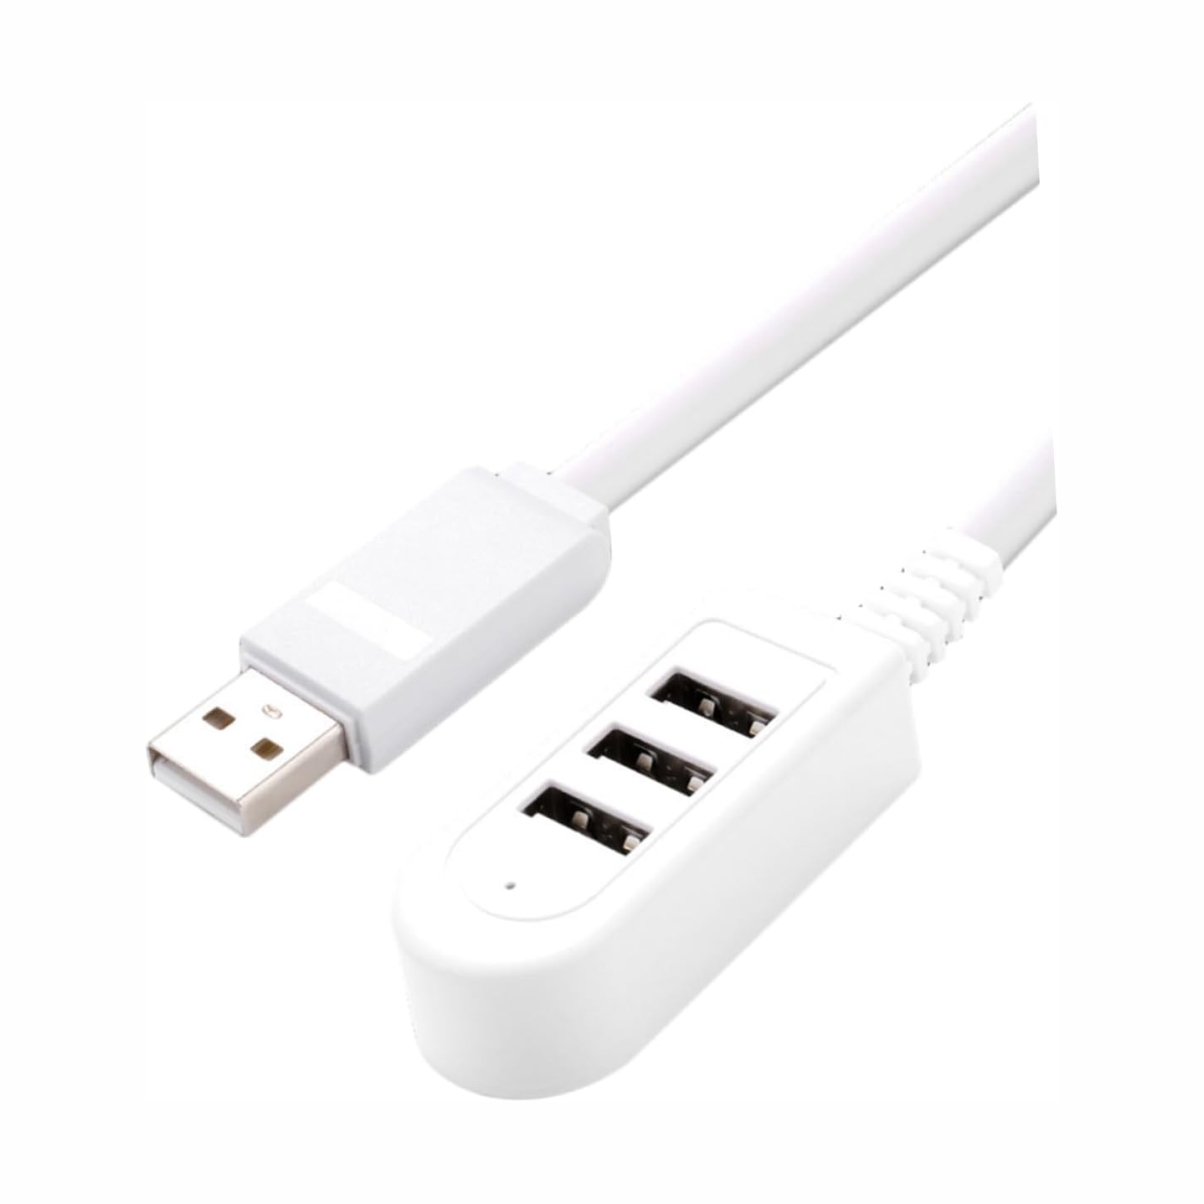 Fronix 3-Port USB 3.0 Hub with Ethernet Adapter - Gigabit Speed, Compatible with Windows PC, Laptop, MacBook Pro, USB Flash Drives and More - FRUSB-03 USB Hub (White)